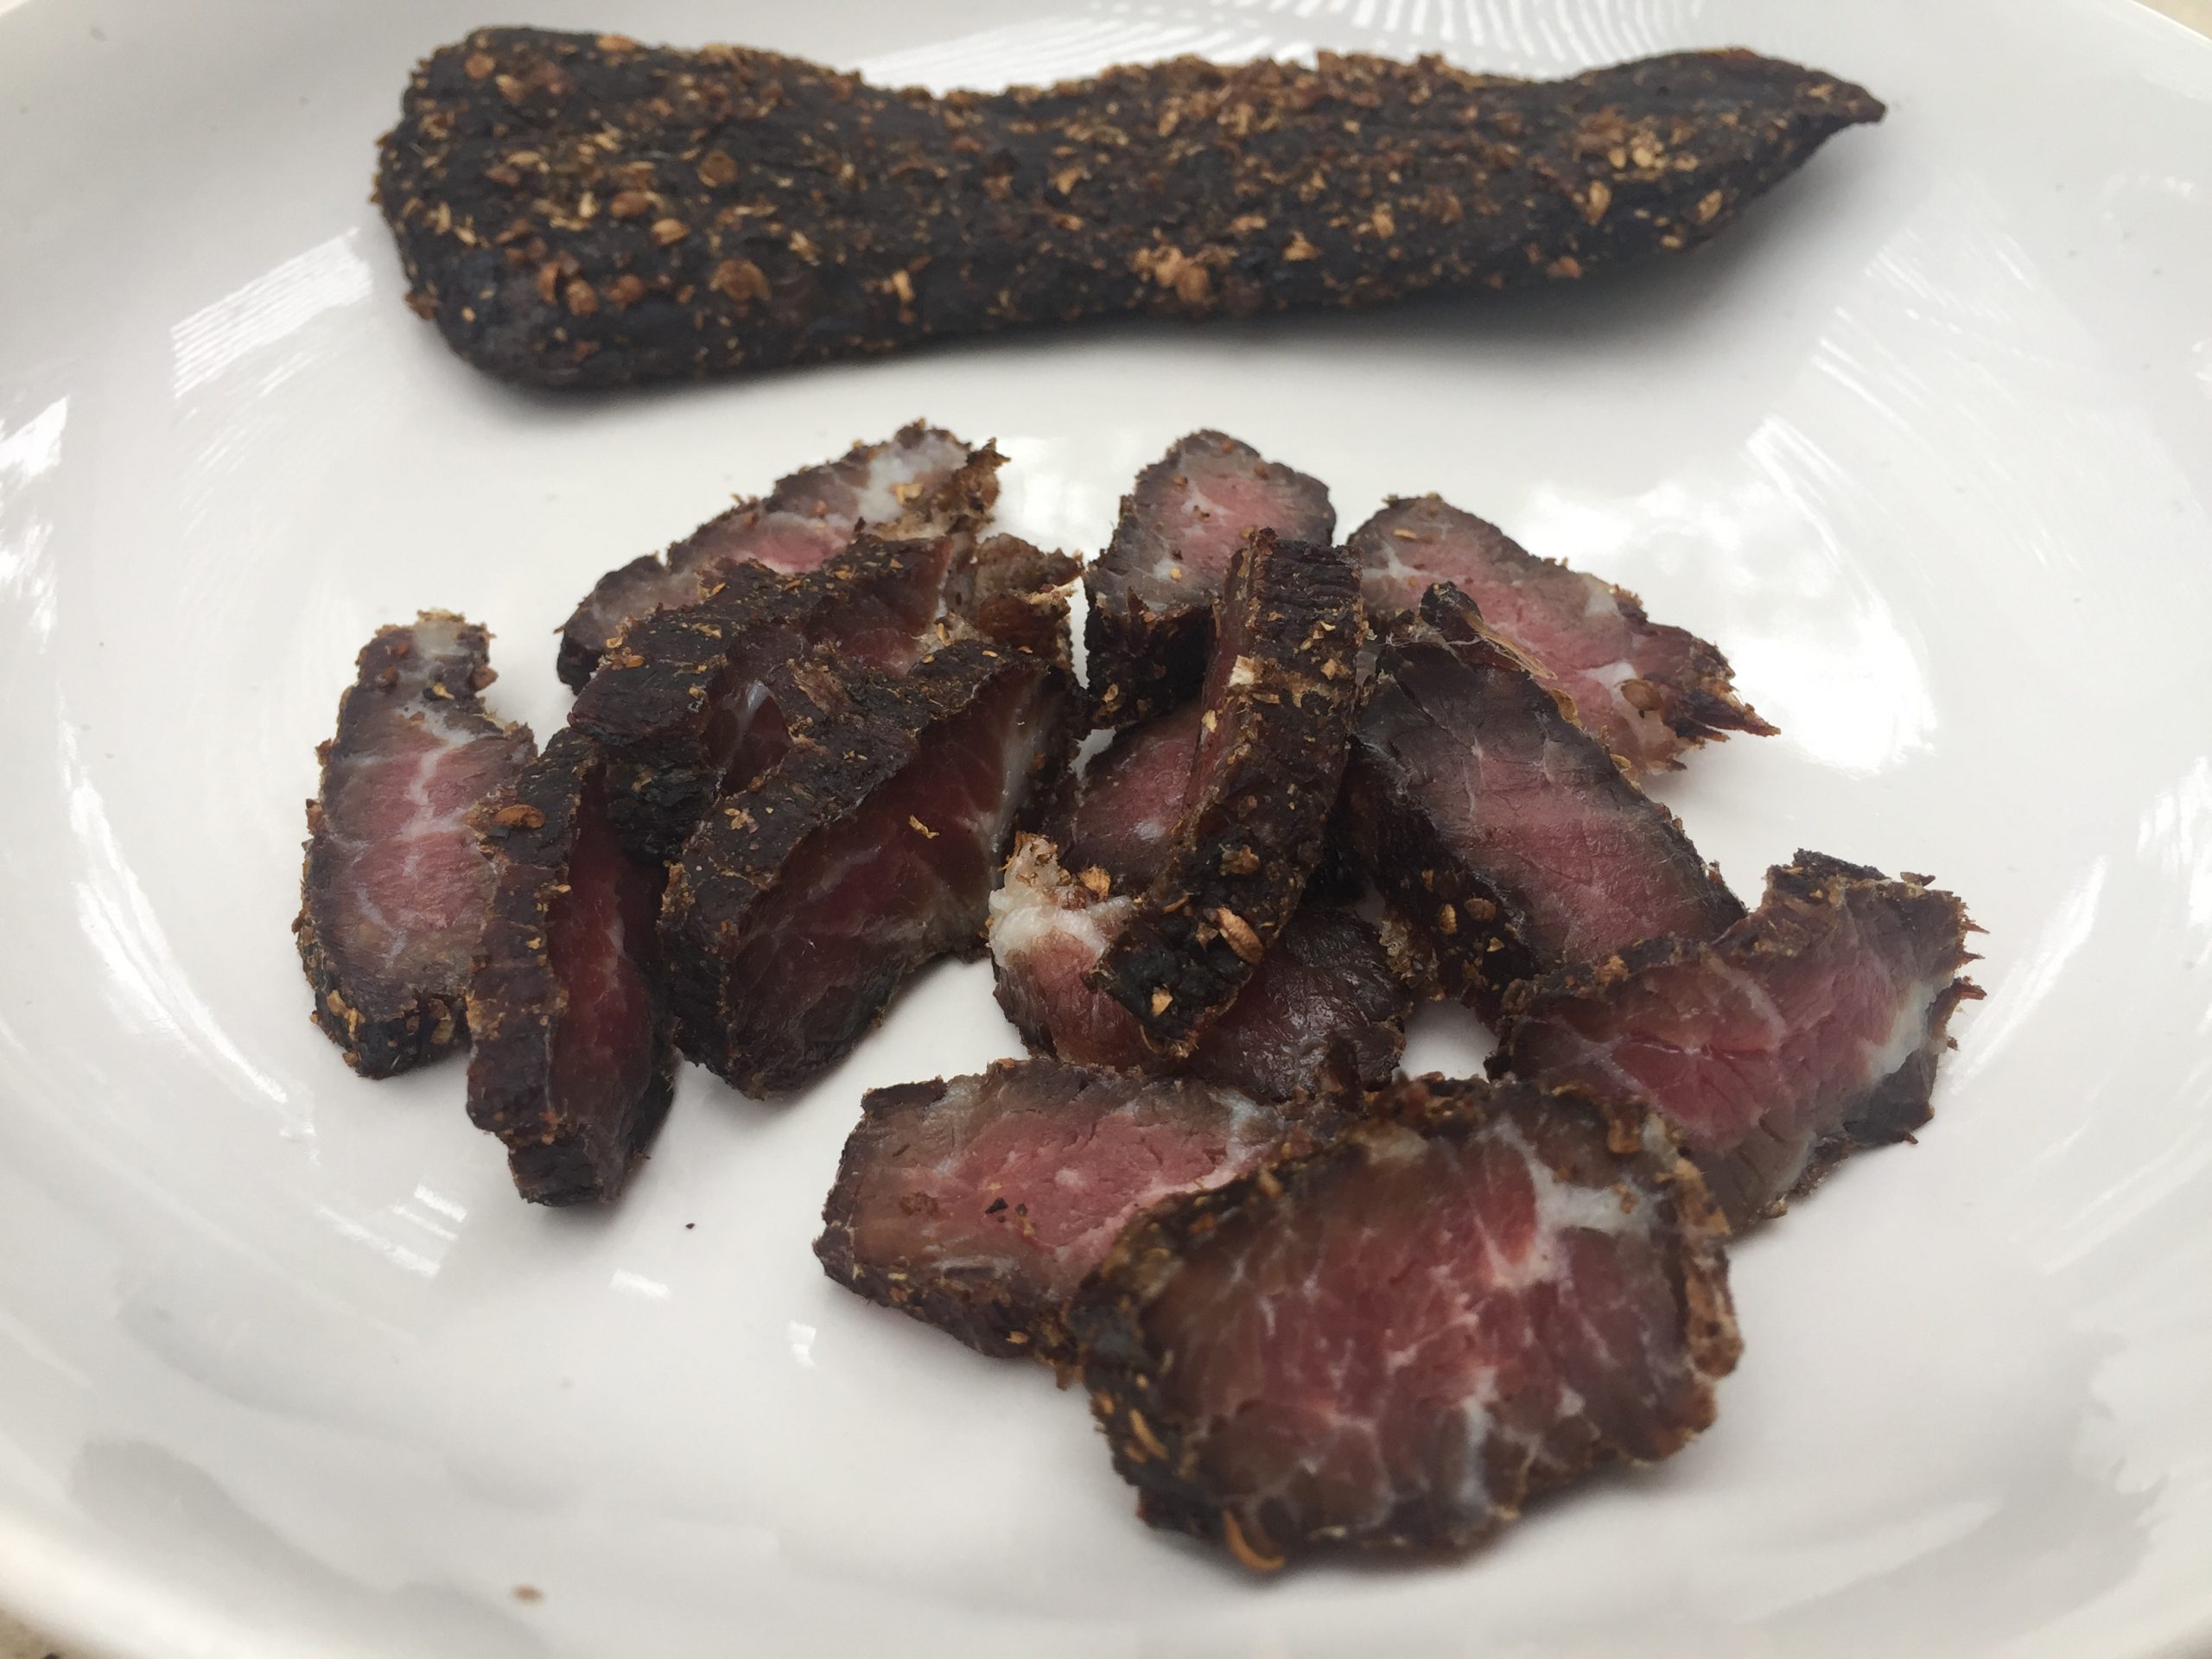 Authentic South African Biltong (thick beef jerkey) recipe in 4 days